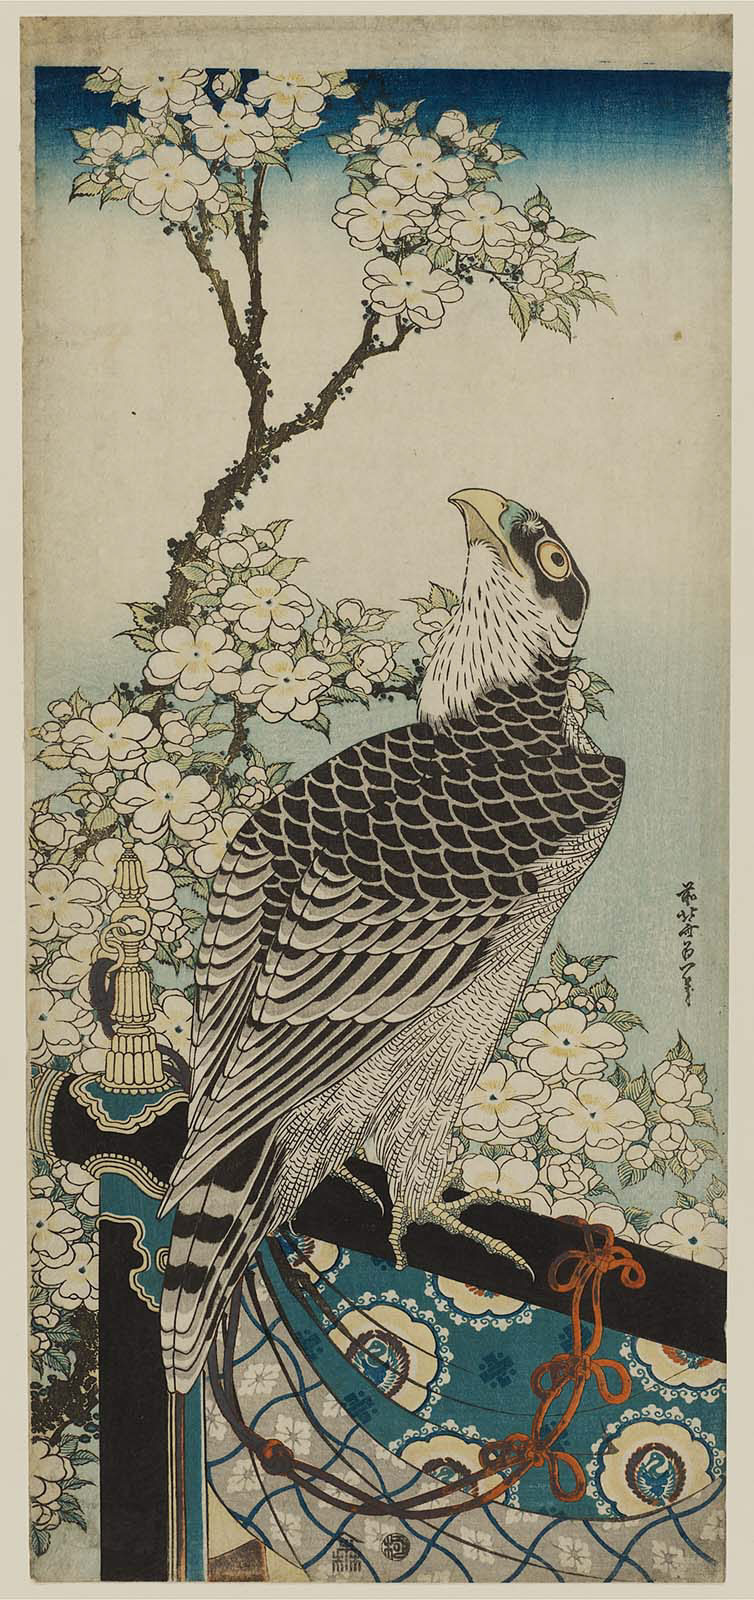 Hokusai - Hawk and Cherry Blossoms - Large Images of Nature